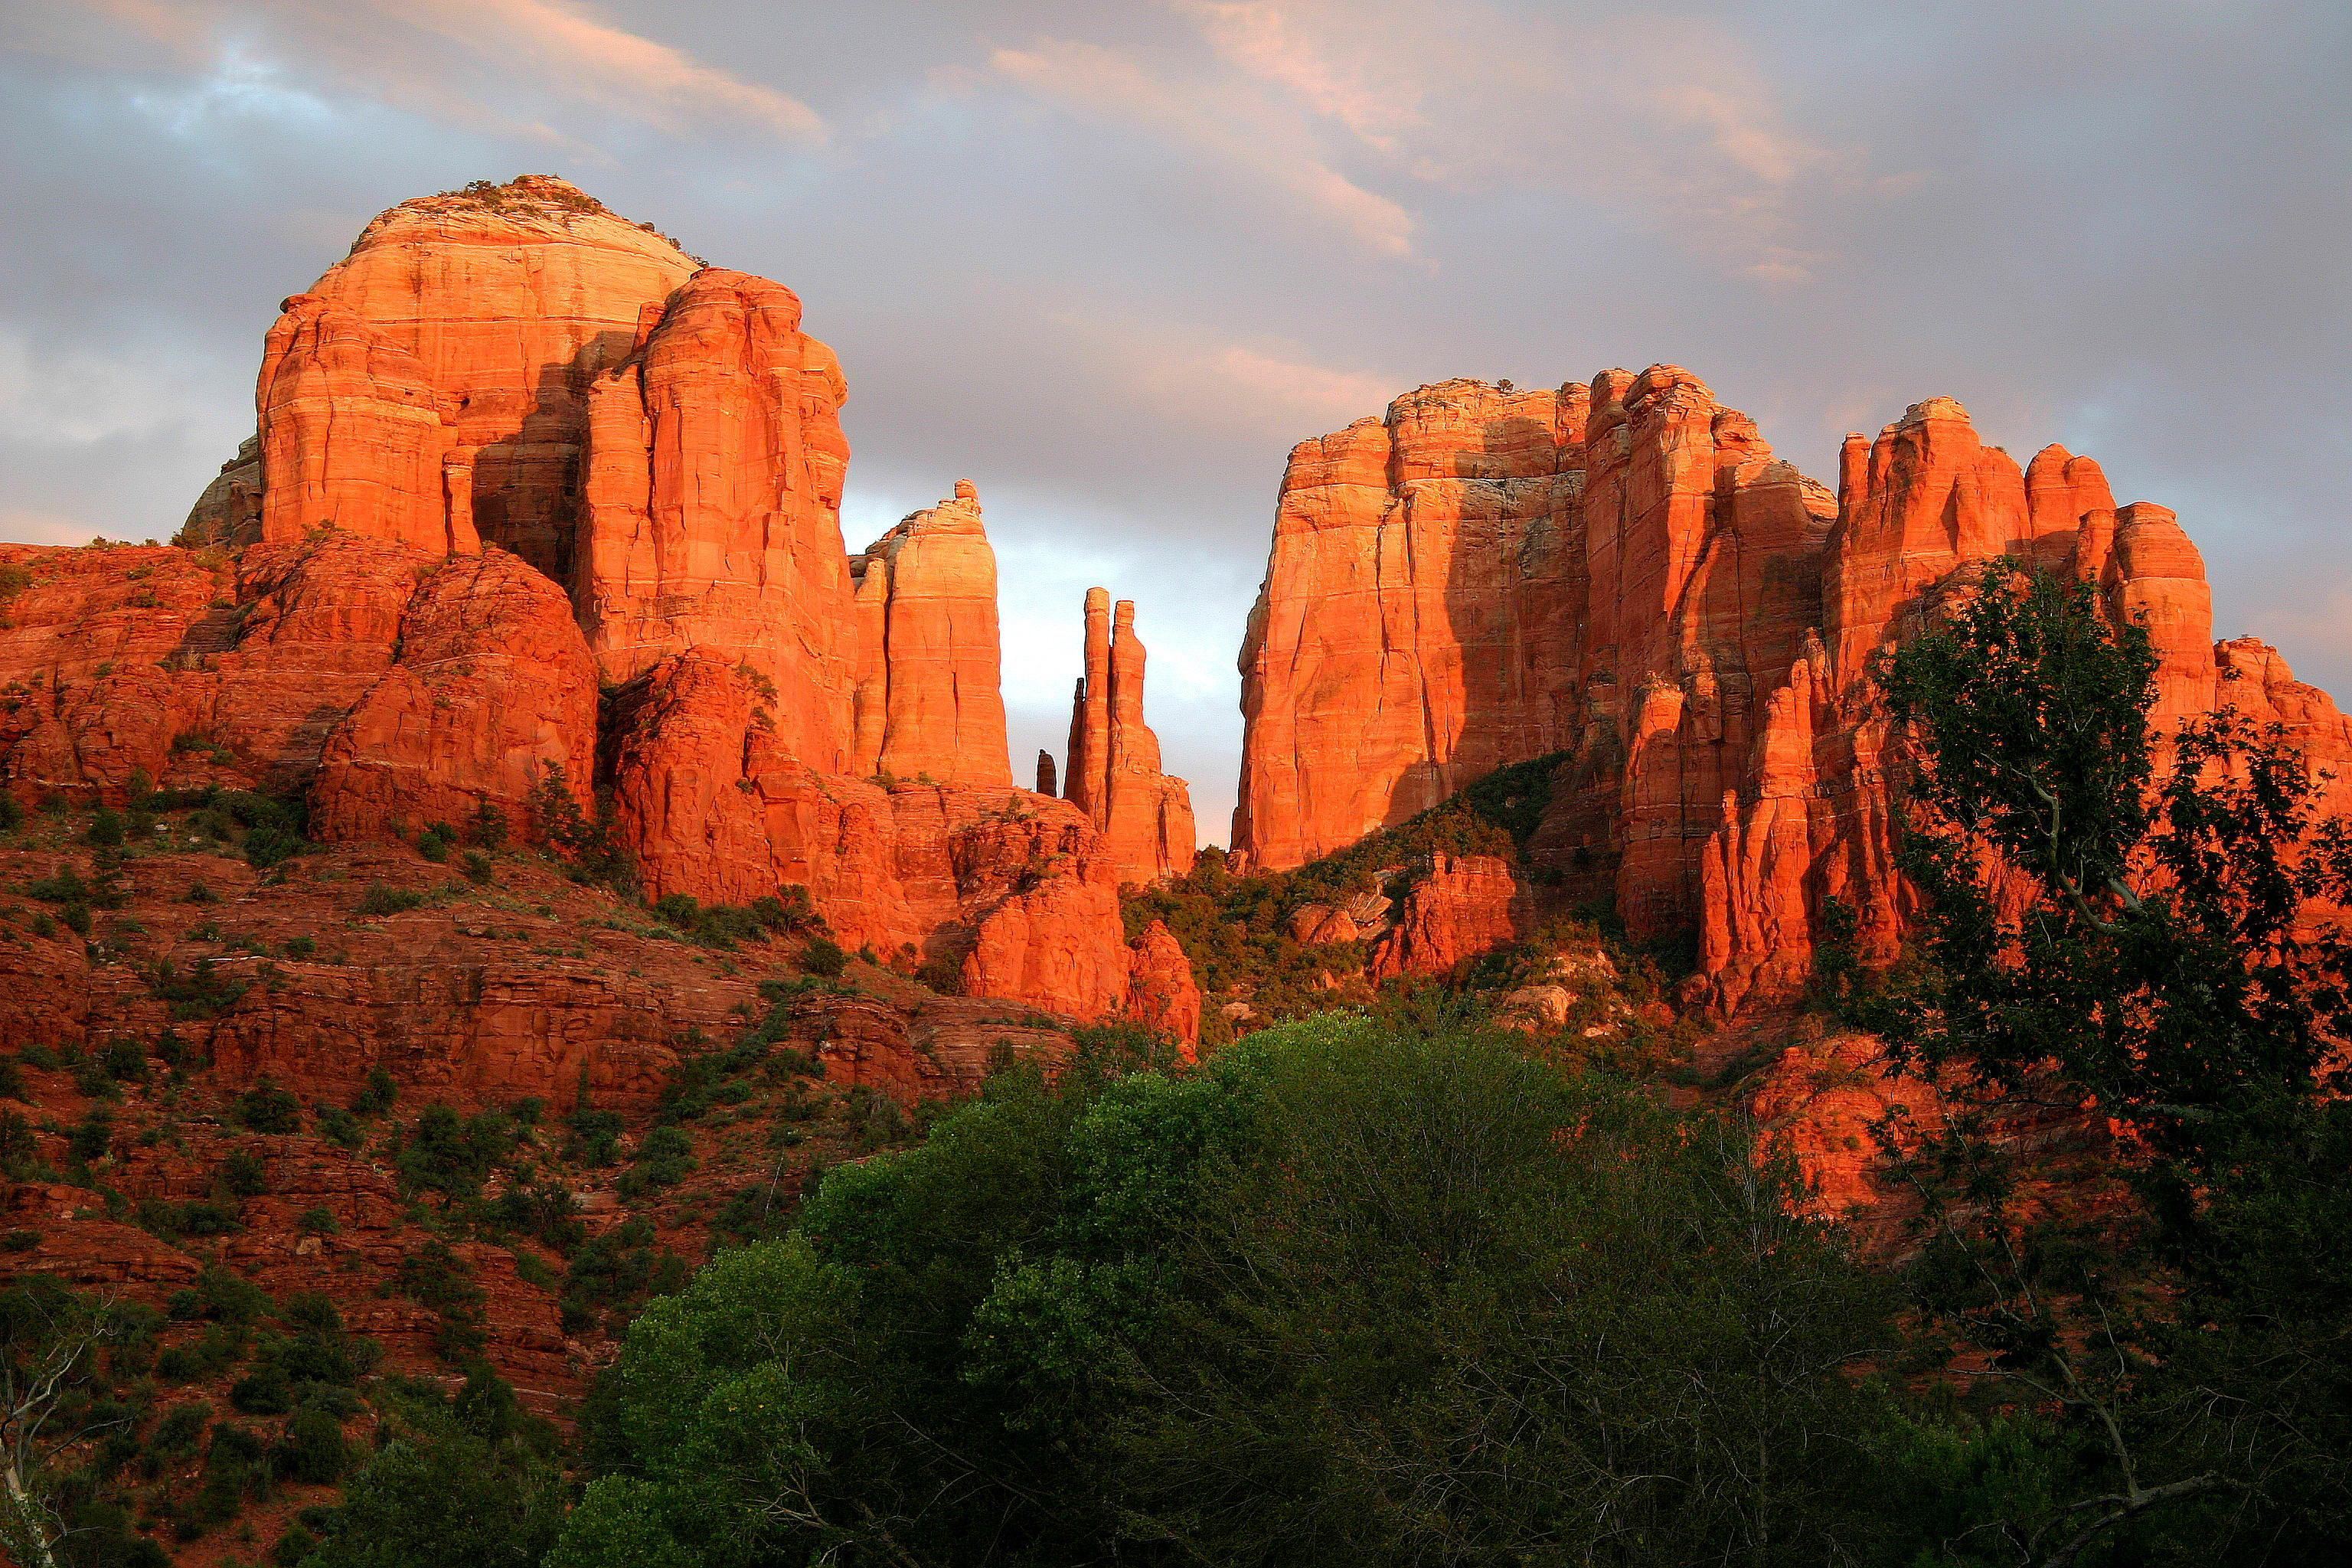 The stunning red rocks of Sedona (Getty Images)